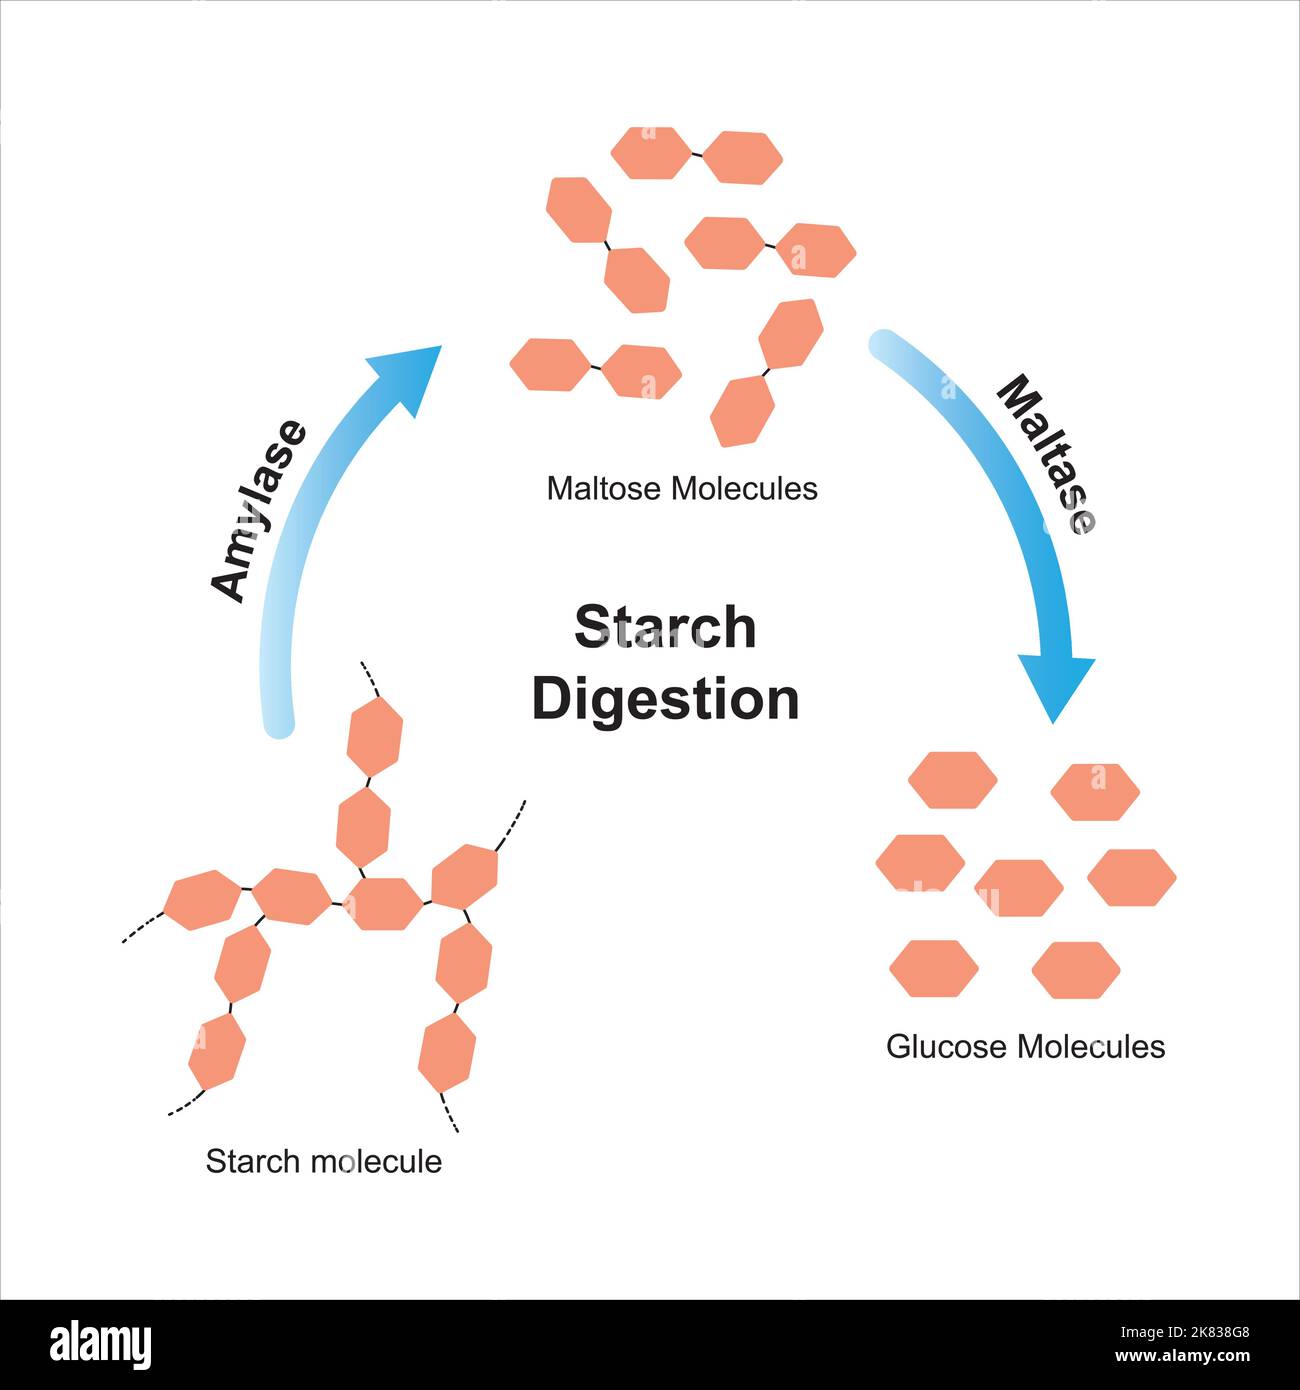 Scientific Designing of Starch Digestion. Amylase and Maltase Enzymes Effect on Starch Molecule. glucose Sugar Formation. Vector Illustration. Stock Vector